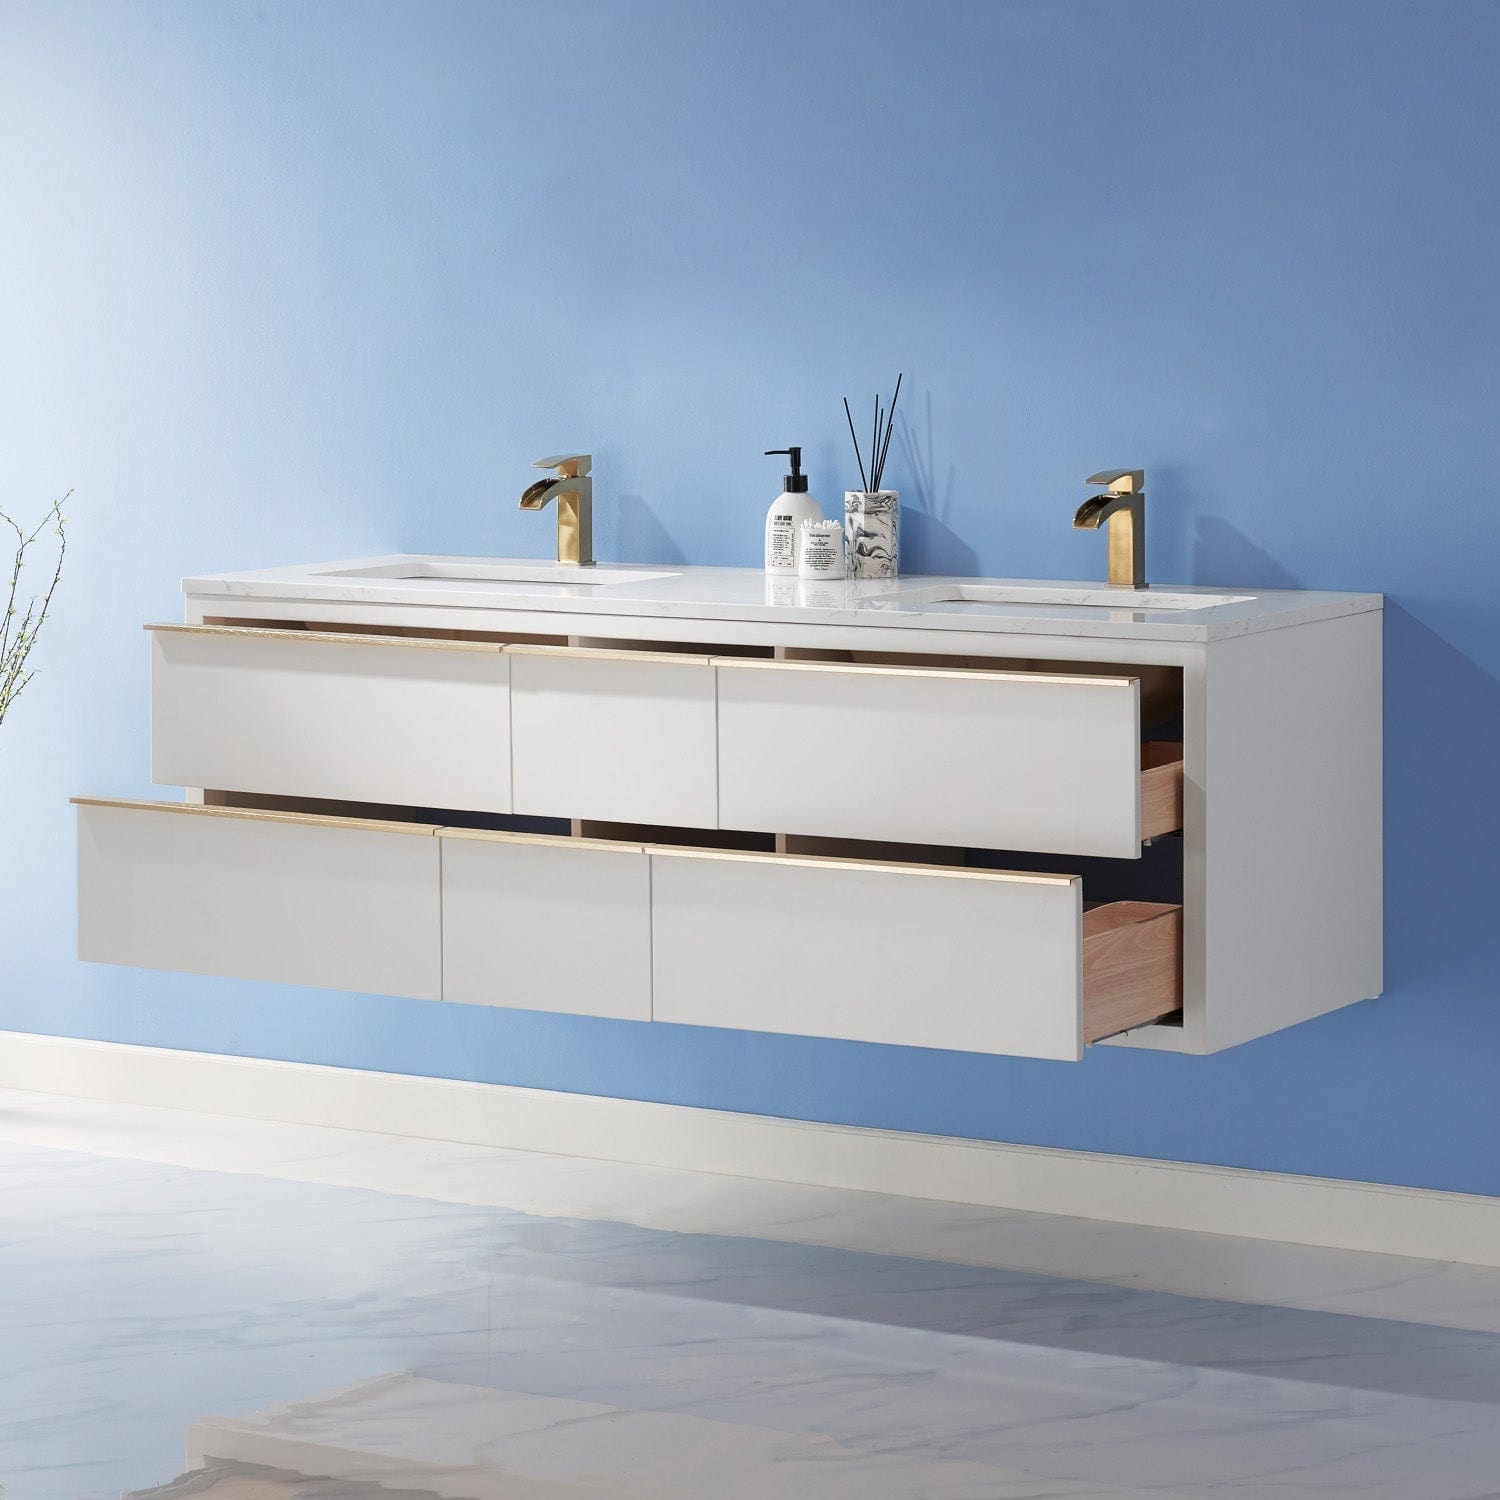 Altair Morgan 60" Double Bathroom Vanity Set in White and Composite Carrara White Stone Countertop without Mirror 534060-WH-AW-NM - Molaix631112971805Vanity534060-WH-AW-NM